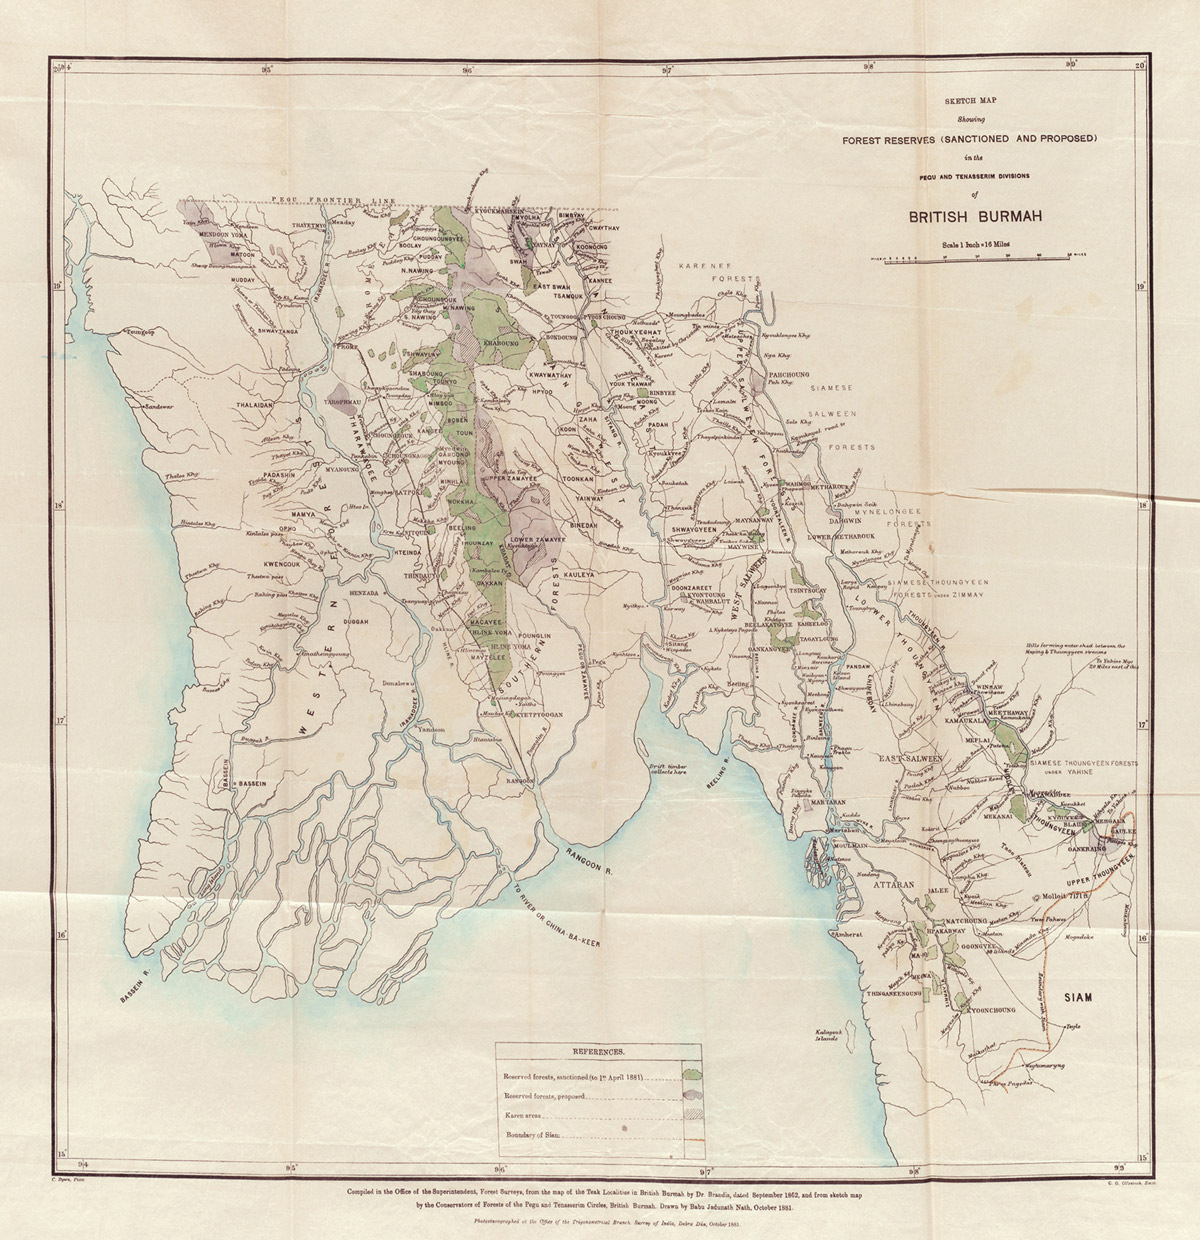 A large-scale forest plan for Burma from the 1870s, one of the earliest such plans ever devised. Courtesy Botany Libraries, Harvard University Herbaria.